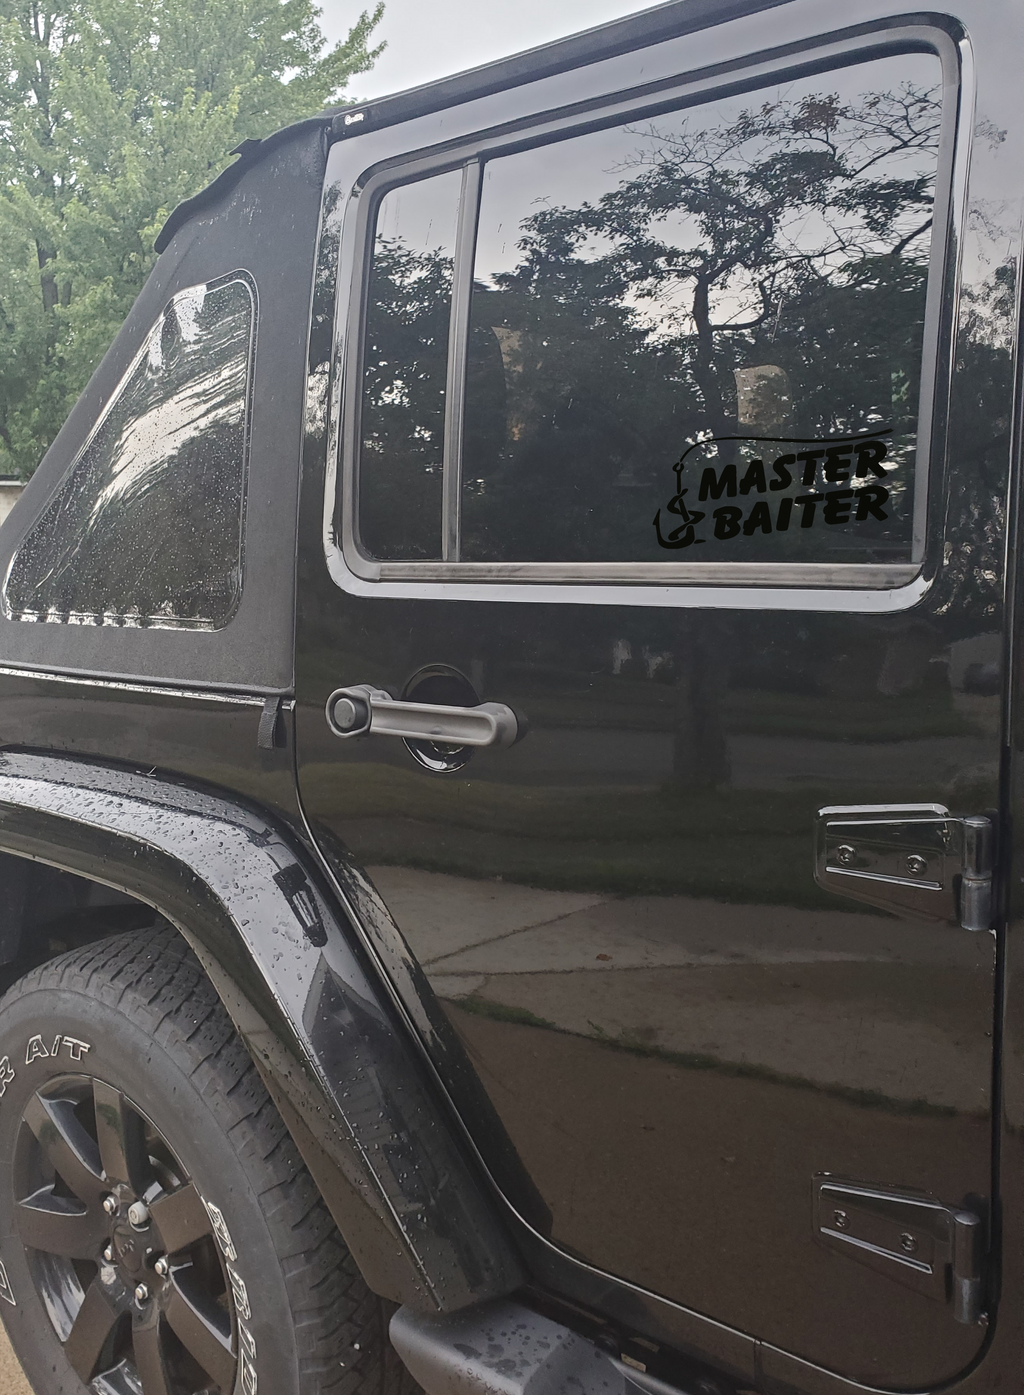 Master Baiter Decal - Vehicle Decals | Vinyl and Sass Creations | Custom Vinyl and Sublimated Apparel & Decor